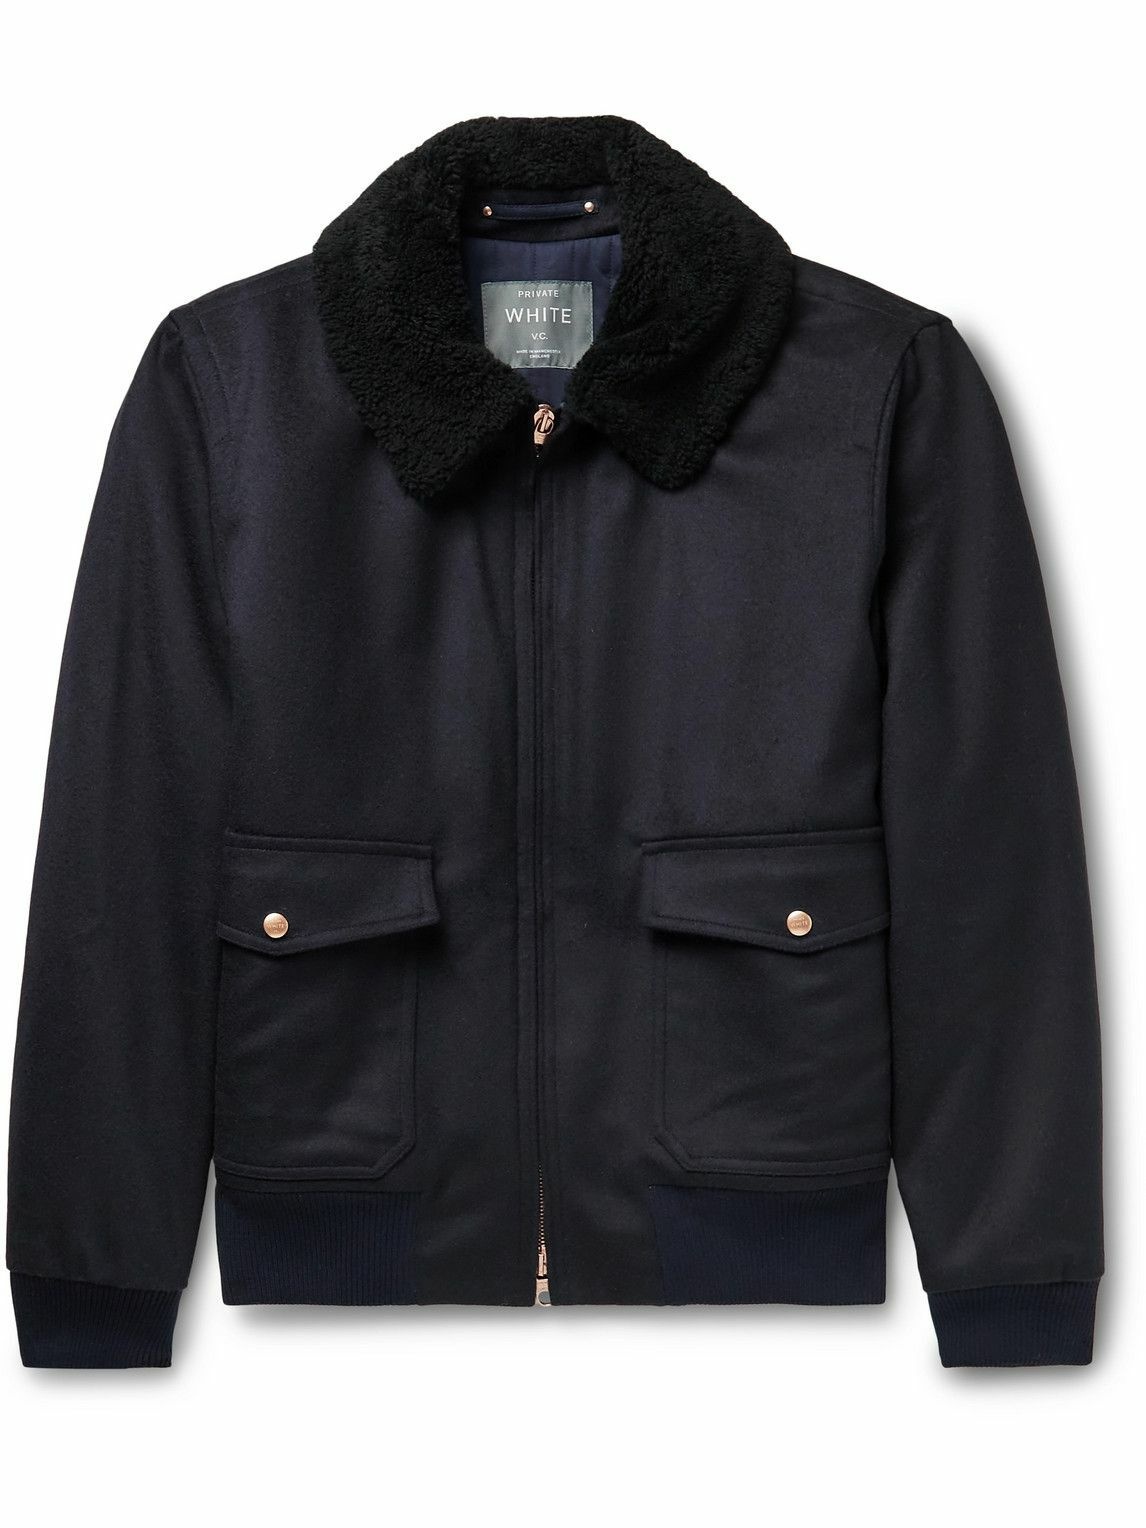 Photo: Private White V.C. - The Pilot's Shearling-Trimmed Wool Bomber Jacket - Blue